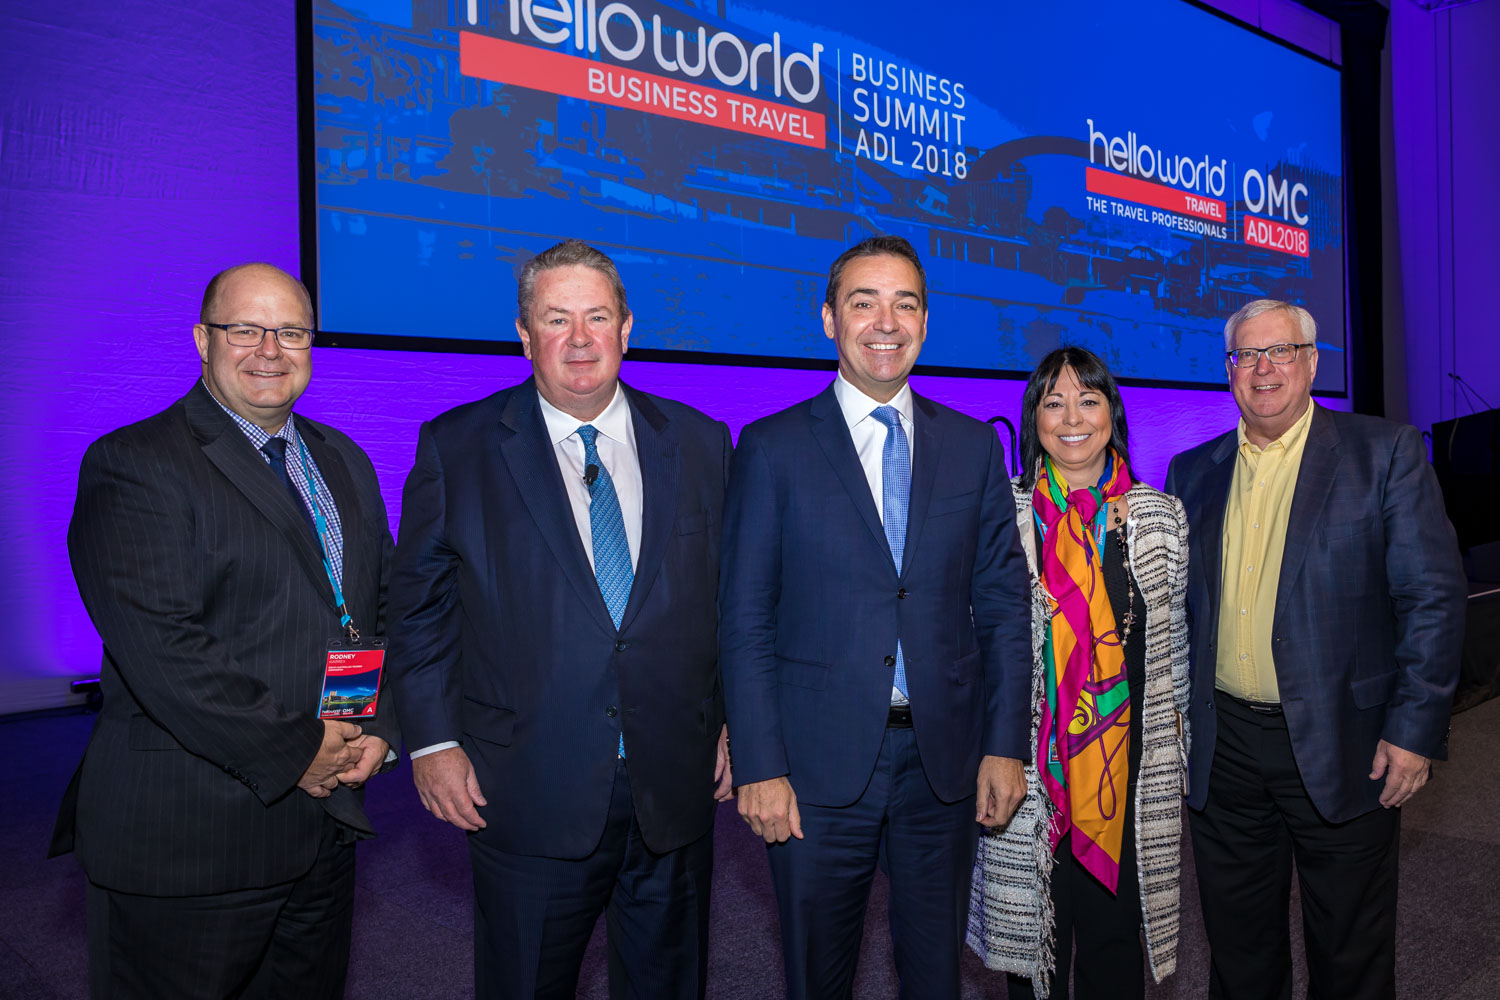 Helloworld makes big announcement as OMC Conference wraps up Travel